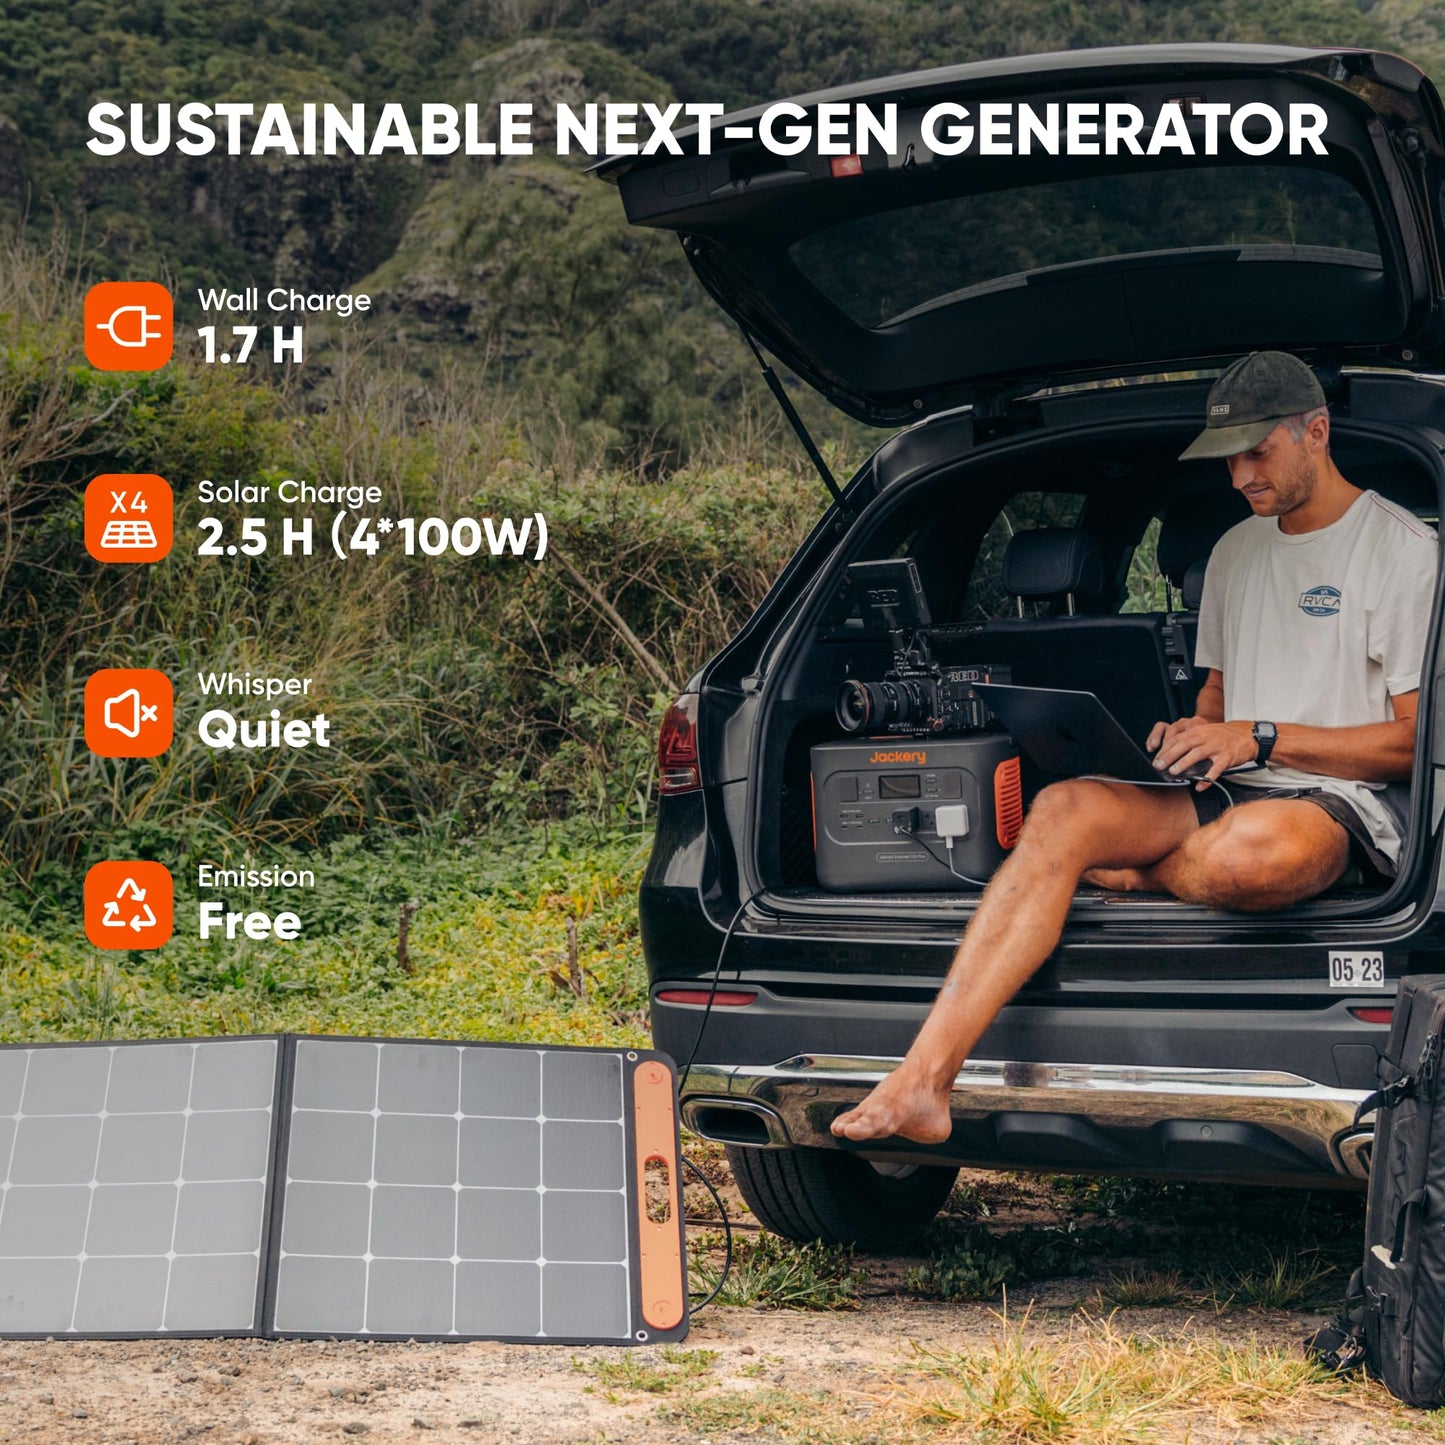 Jackery Explorer 700 Plus Portable Power Station 681Wh Backup Power Solution 1000W (2000W Peak) 1.7 H Fast Wall Charging with 3*AC Outlet 4*USB and 1*DC Car Port for Home Use, Outdoor Camping